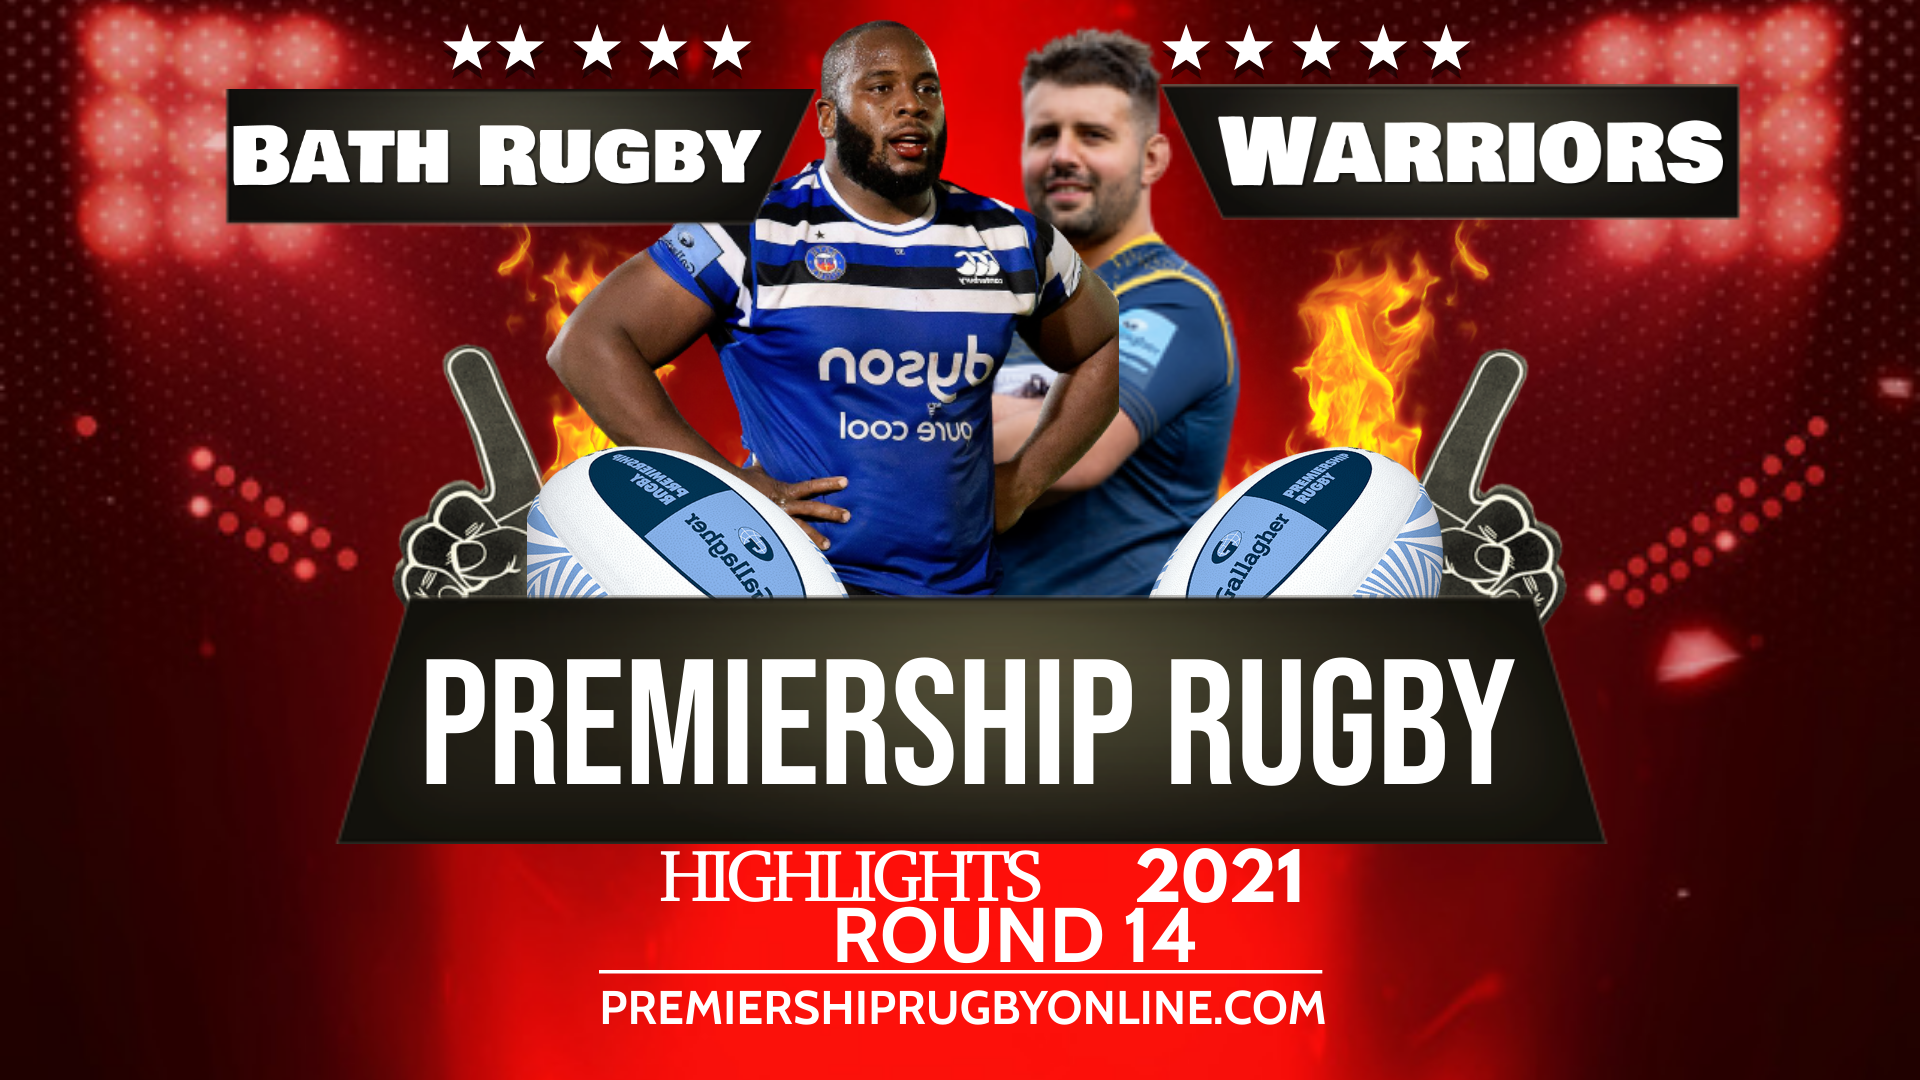 Bath Rugby Vs Worcester Warriors Highlights 2021 RD 14